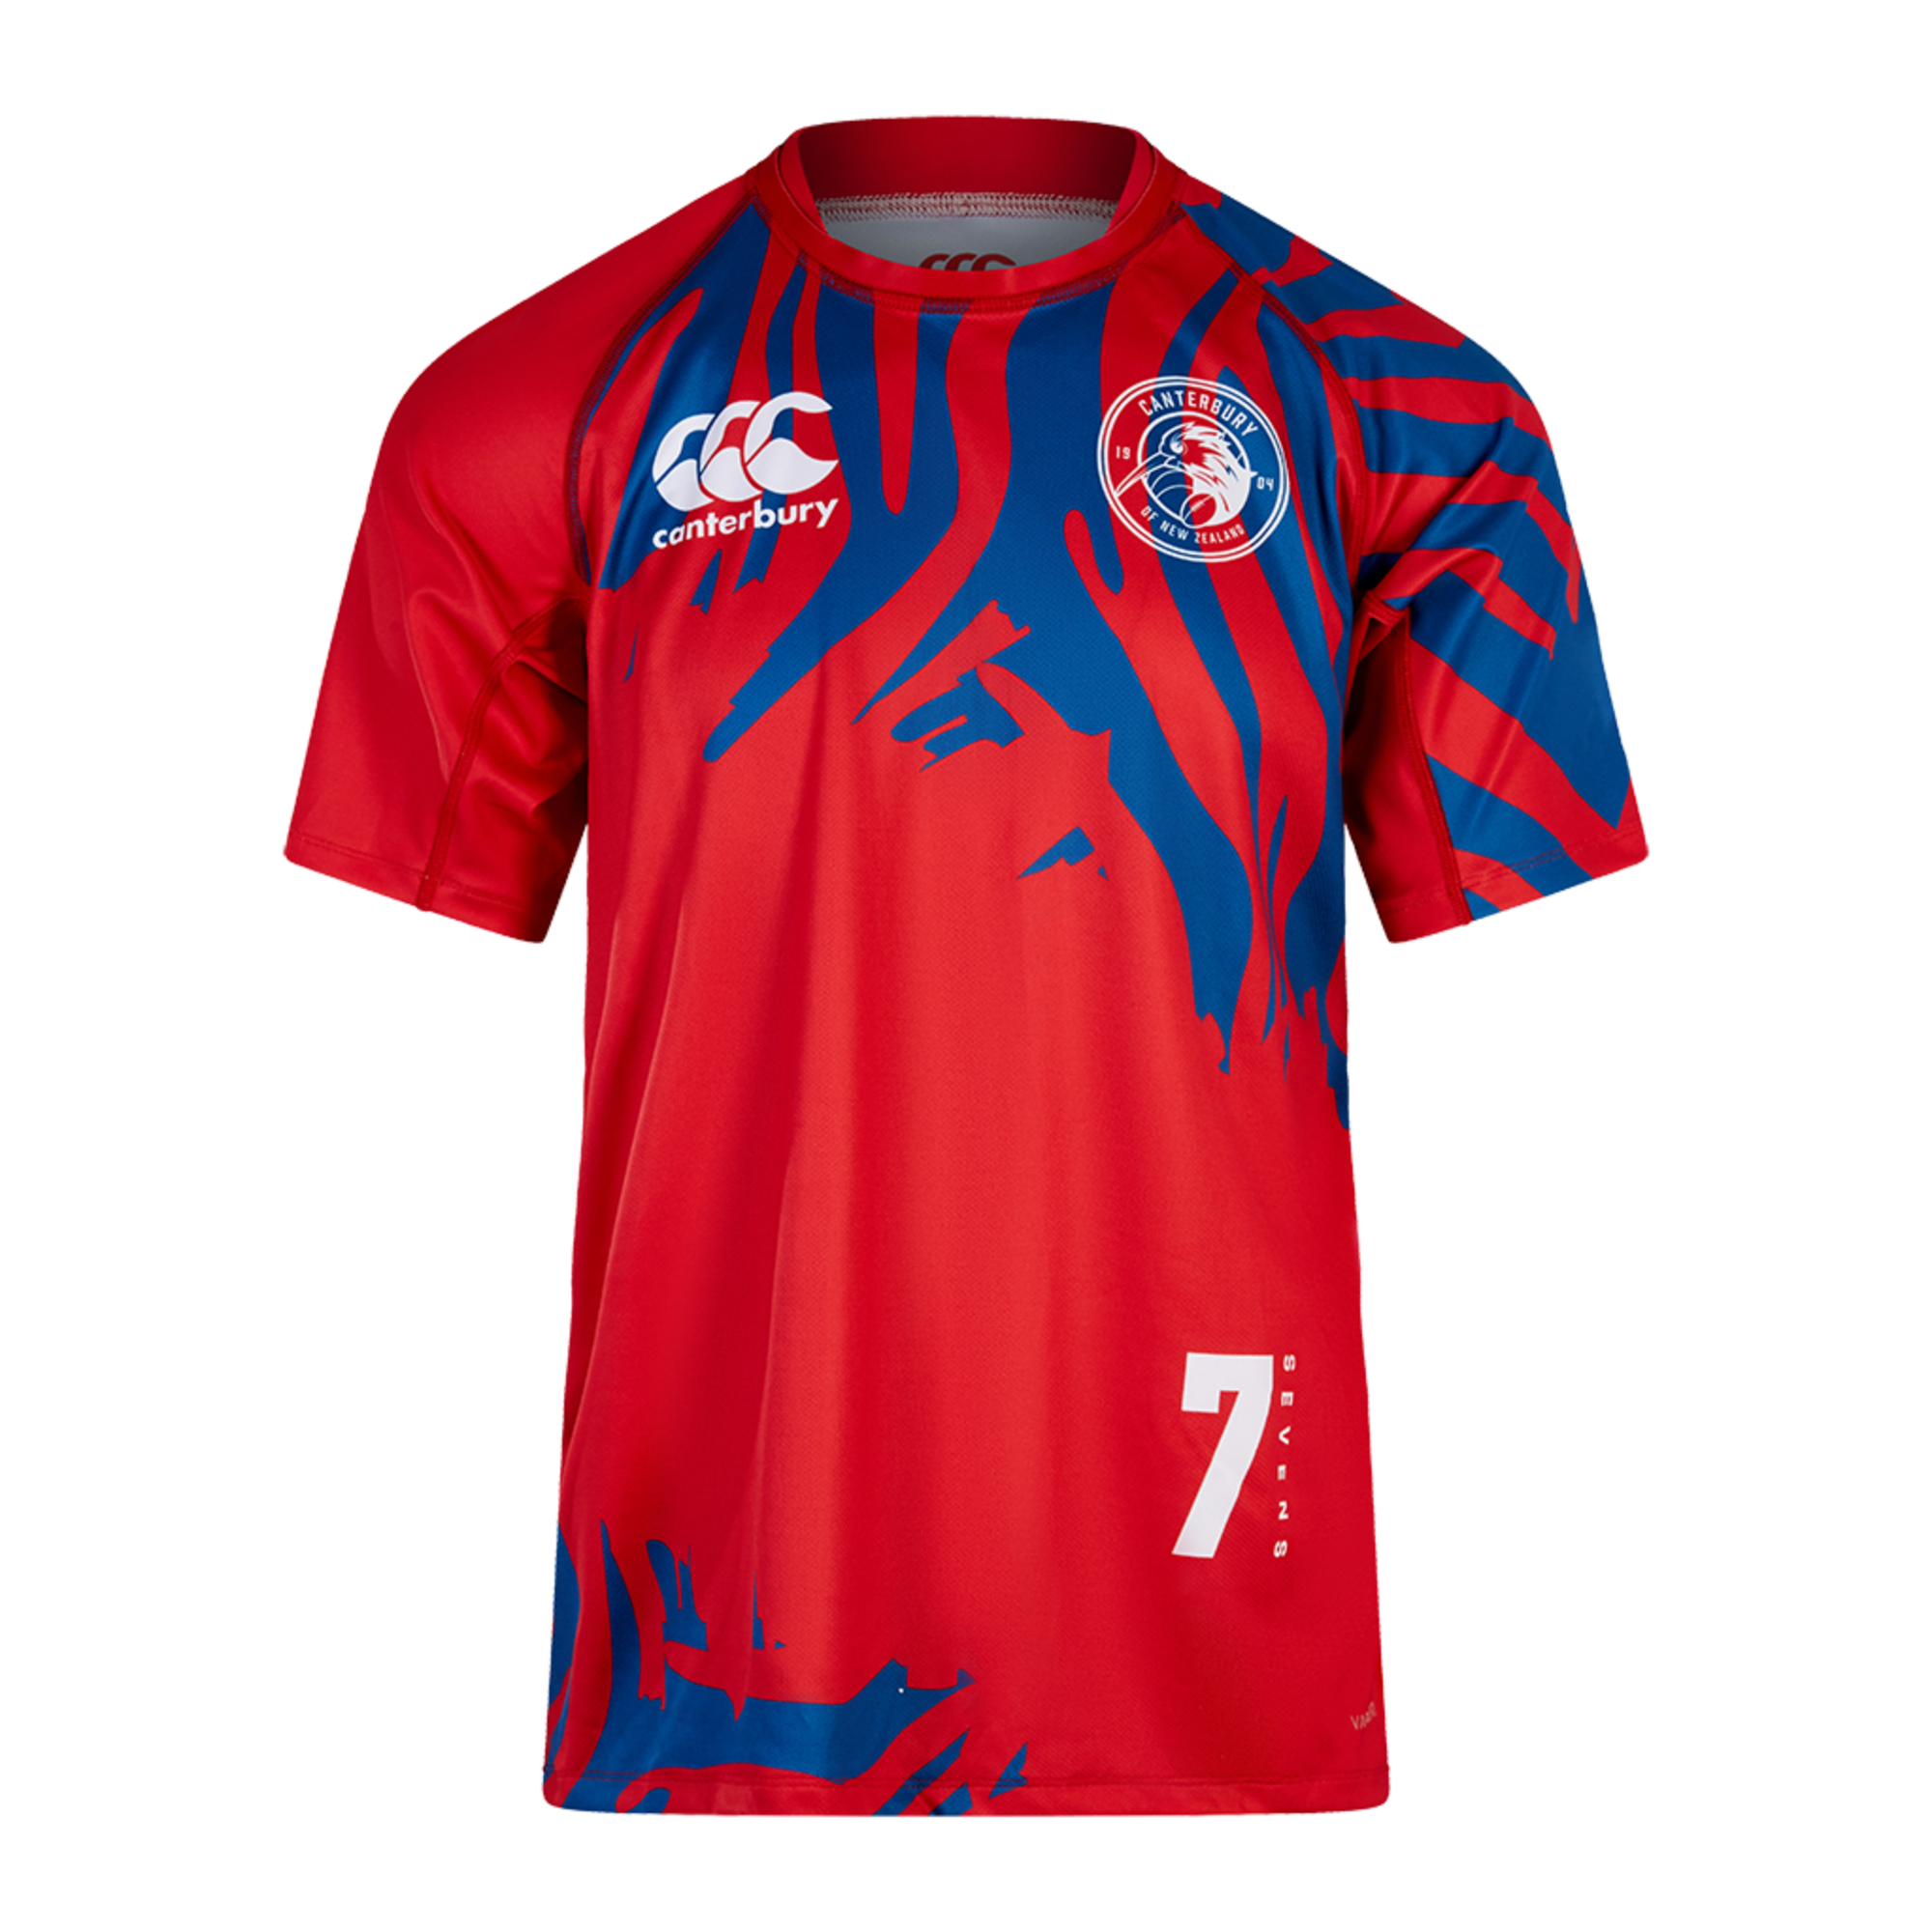 Canterbury CCC MTO Raiona Jersey Available in Men's, Women's, and Youth Sizing XS - 4XL With Customizable Team Colors